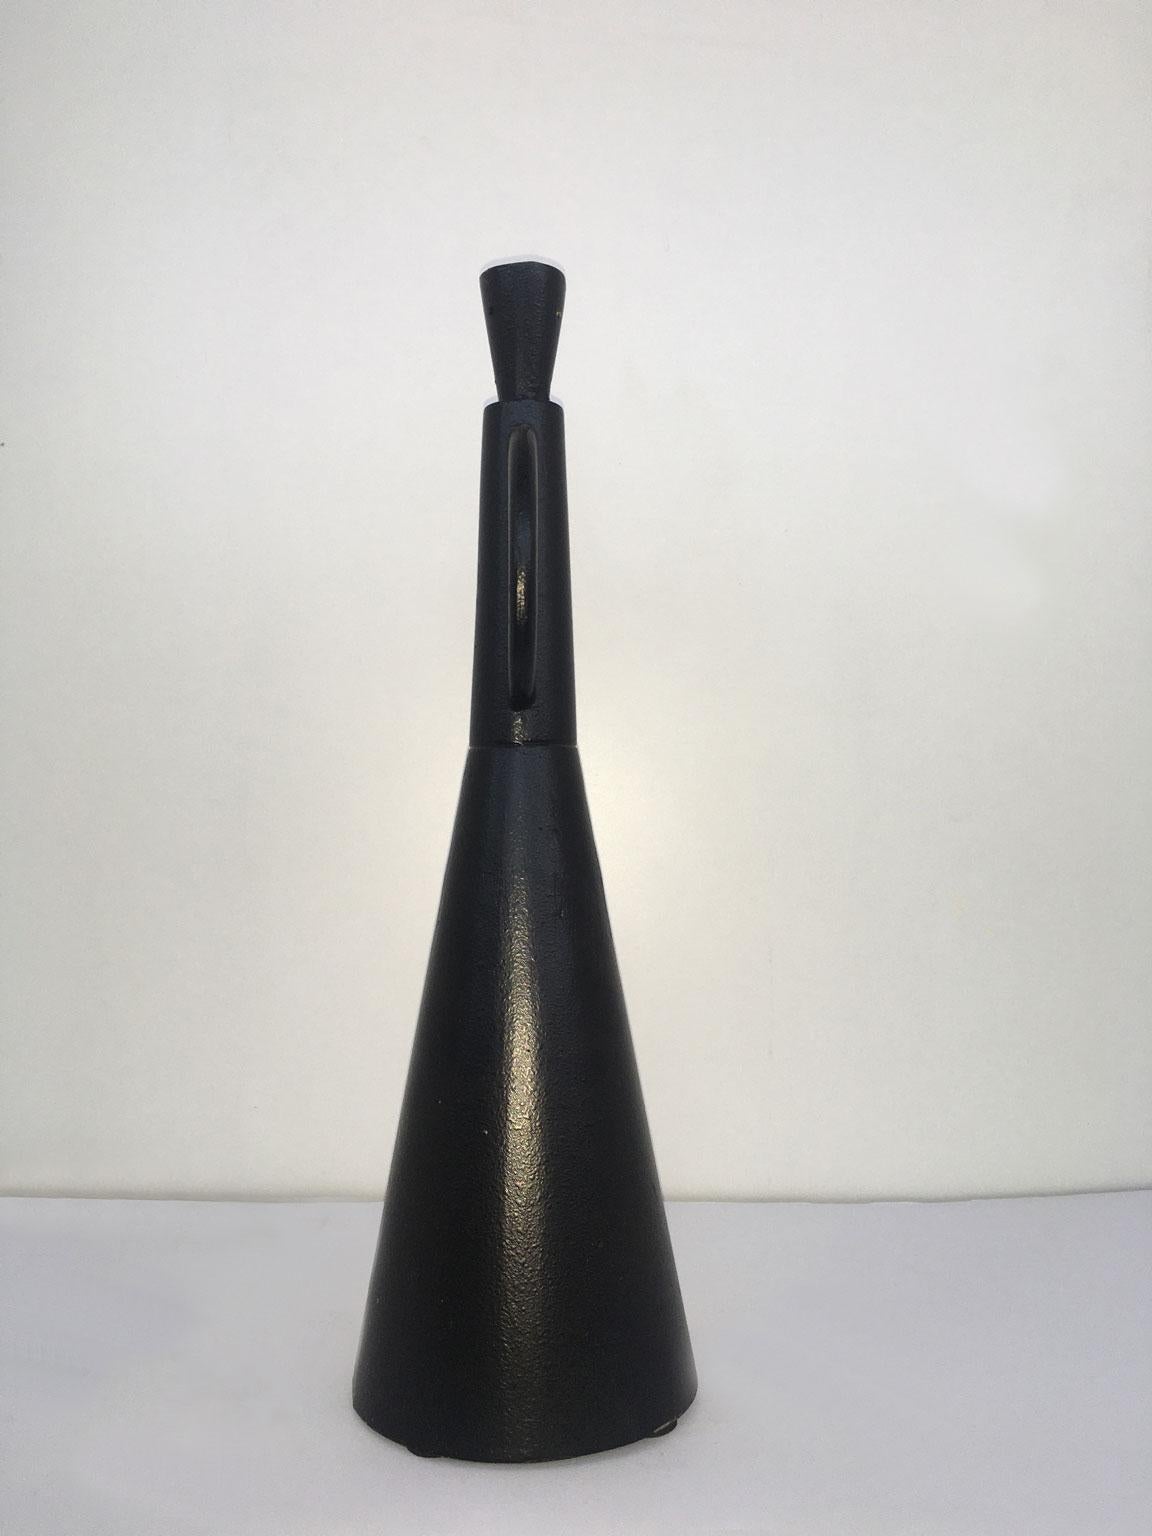 1980 Italy Post-Modern Alessandro Guerriero Abstract Sculpture Portabuono Quo For Sale 4